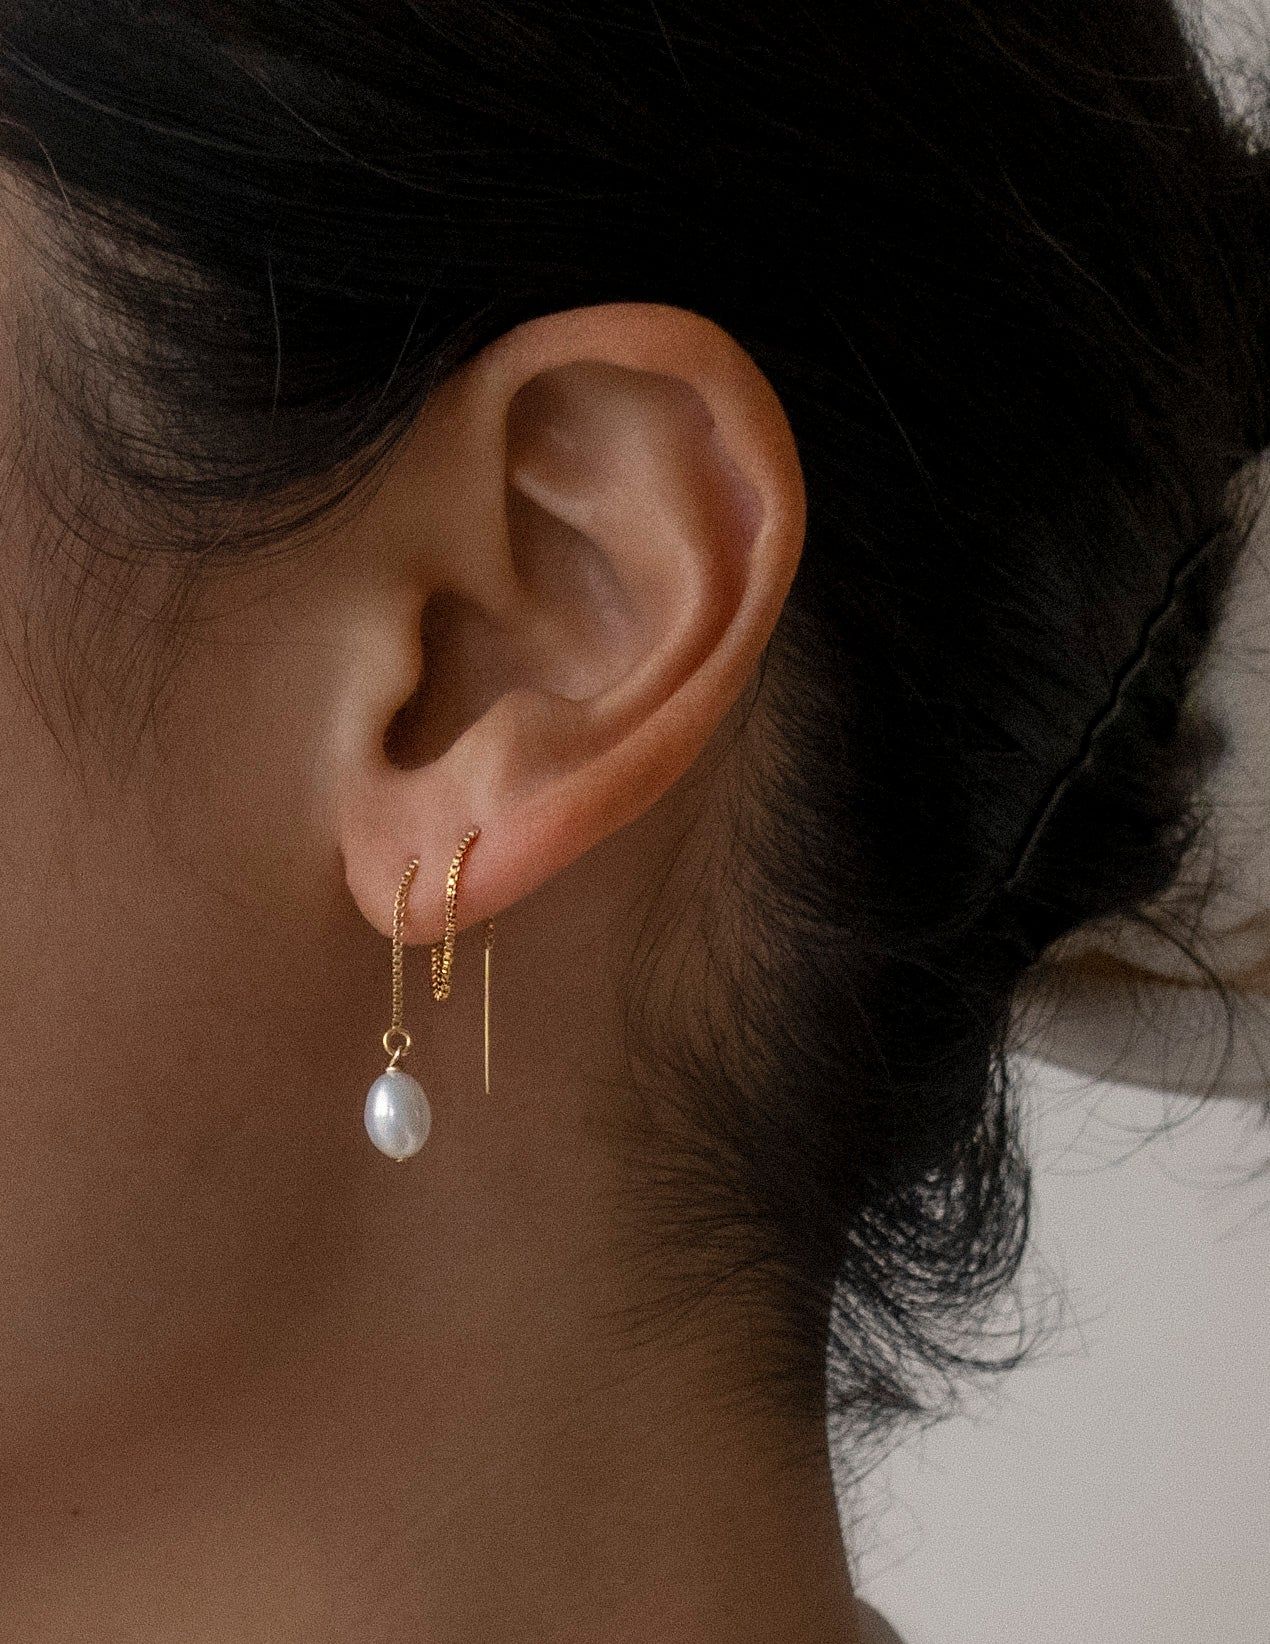 Get elegant look by adding threader earrings to your fashion accessory